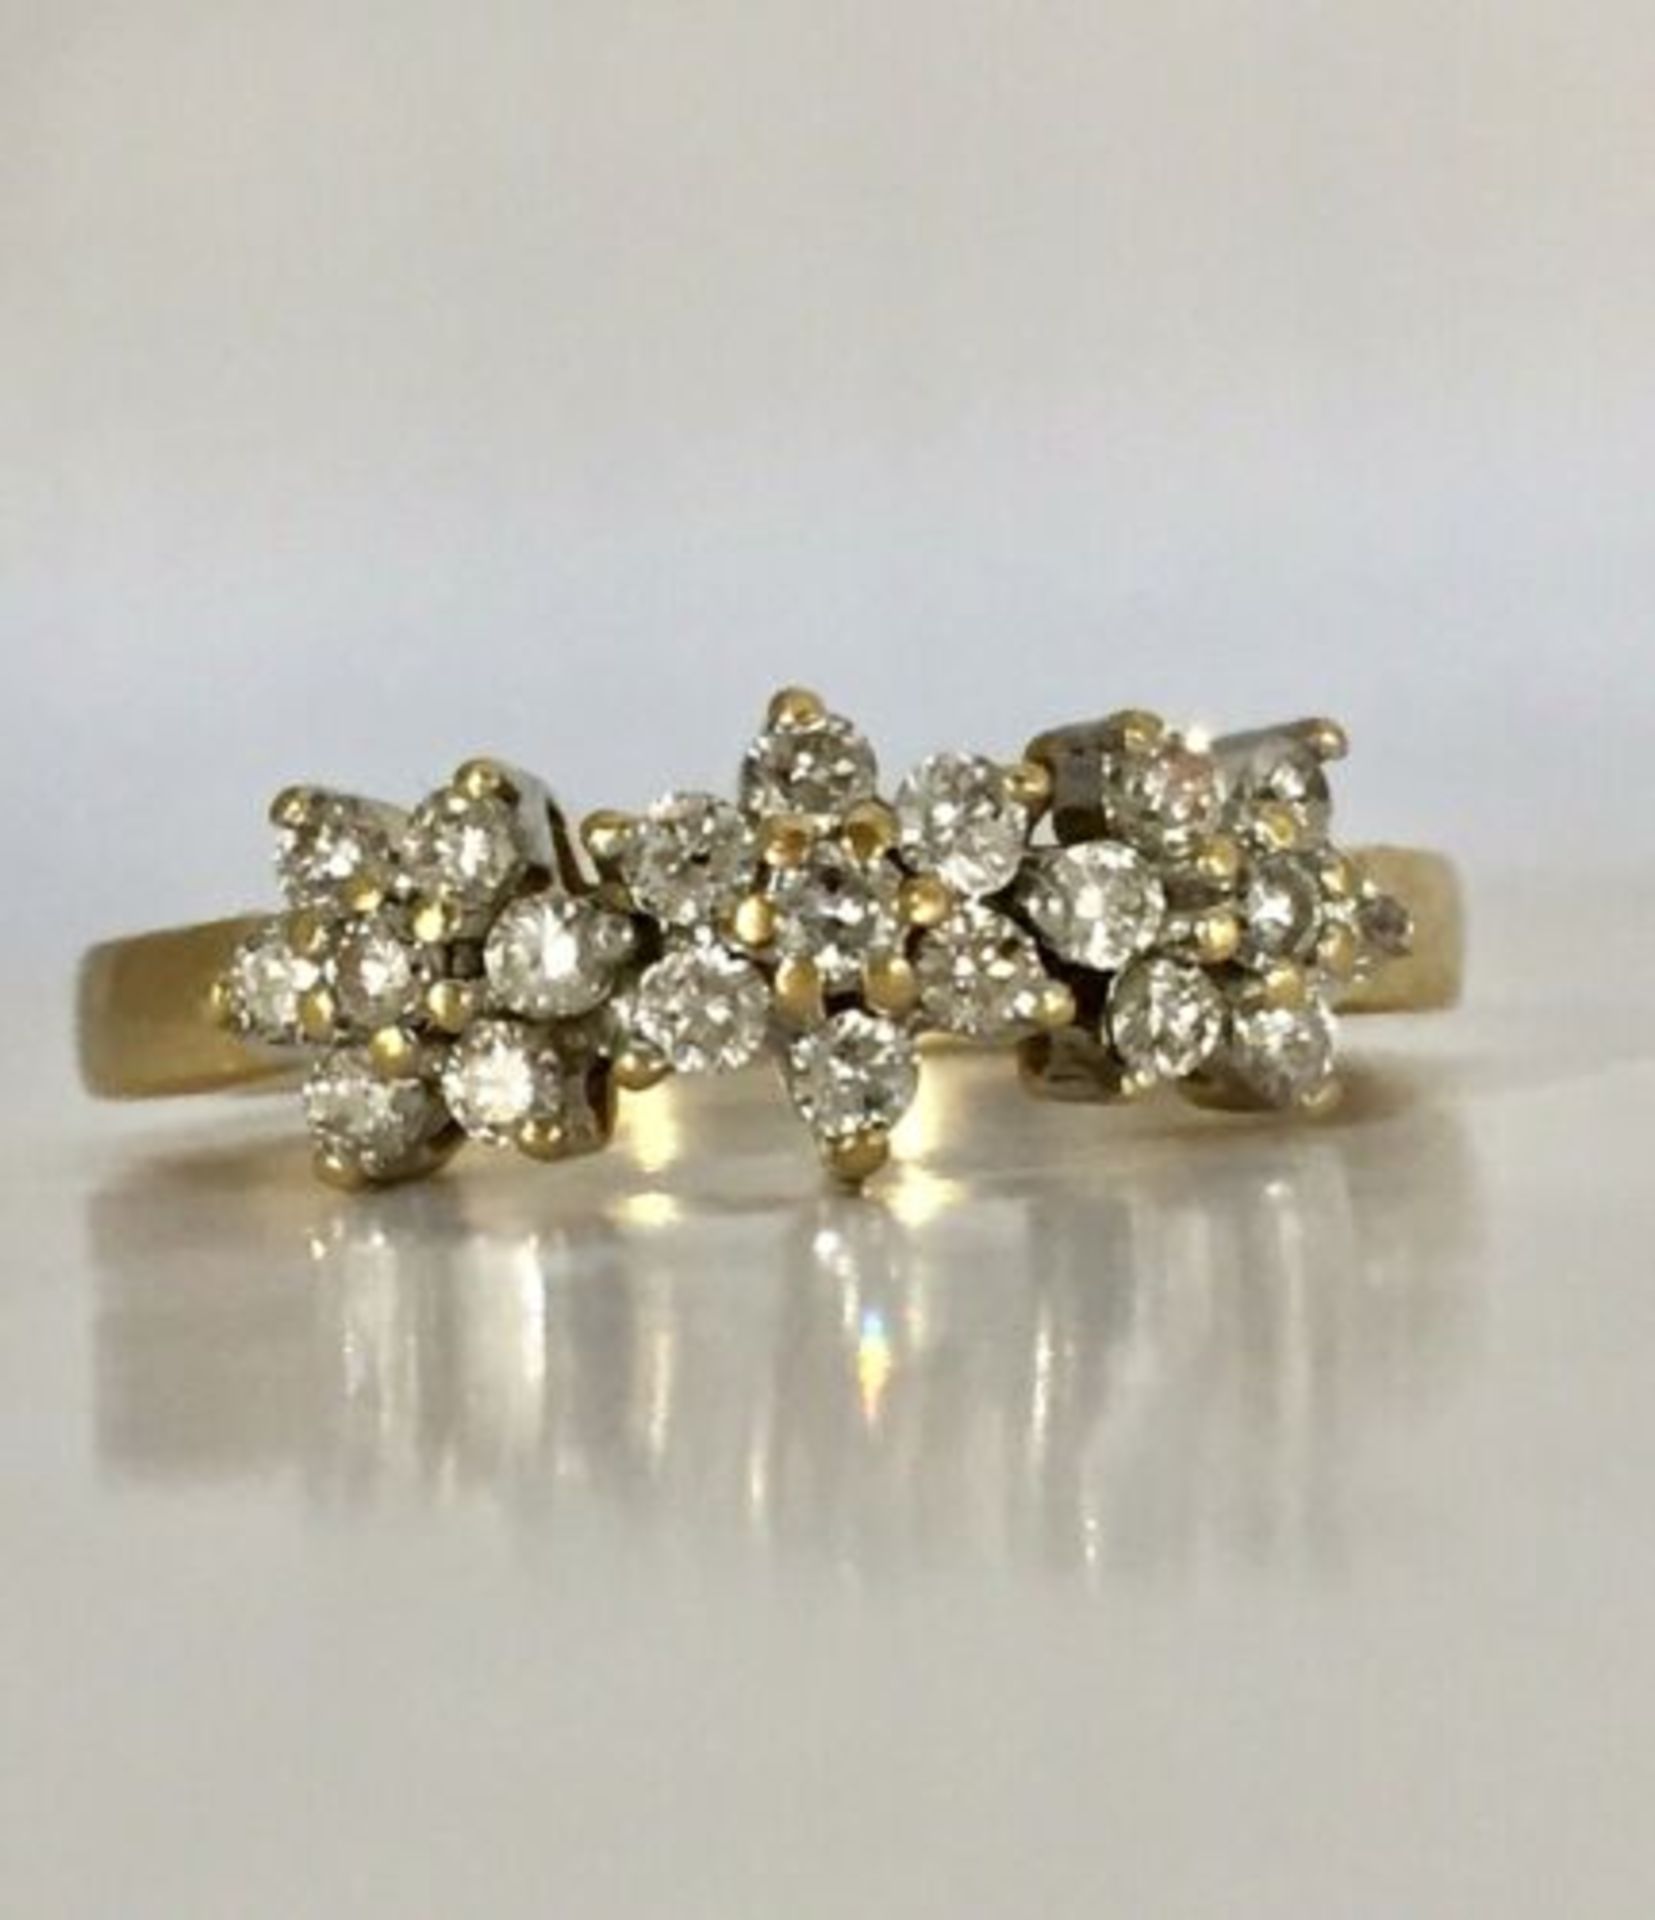 CLUSTER DIAMOND DRESS/ENGAGEMENT RING 18CT YELLOW GOLD - Image 2 of 4